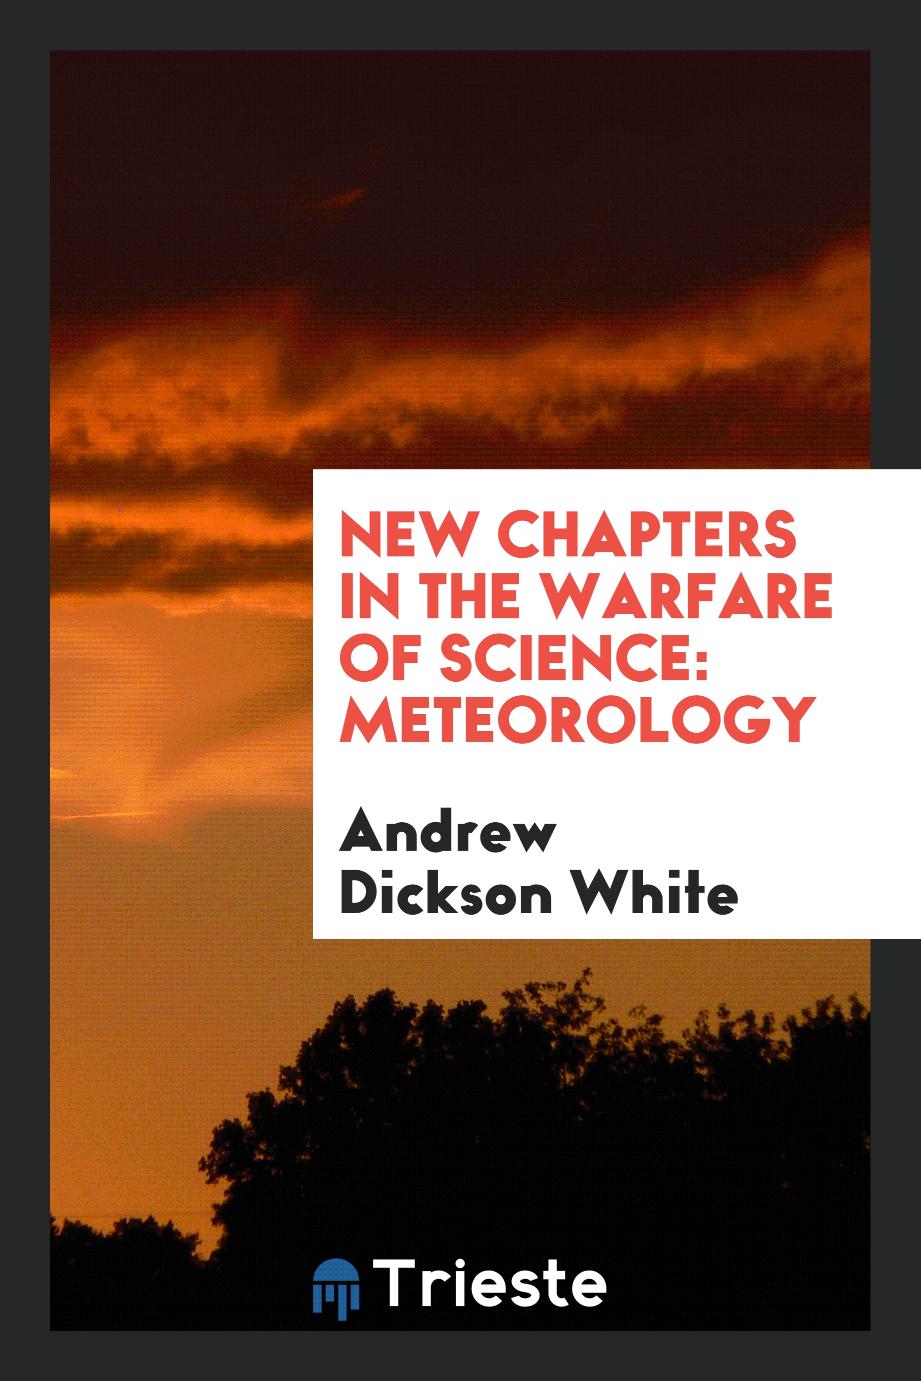 New chapters in the warfare of science: Meteorology